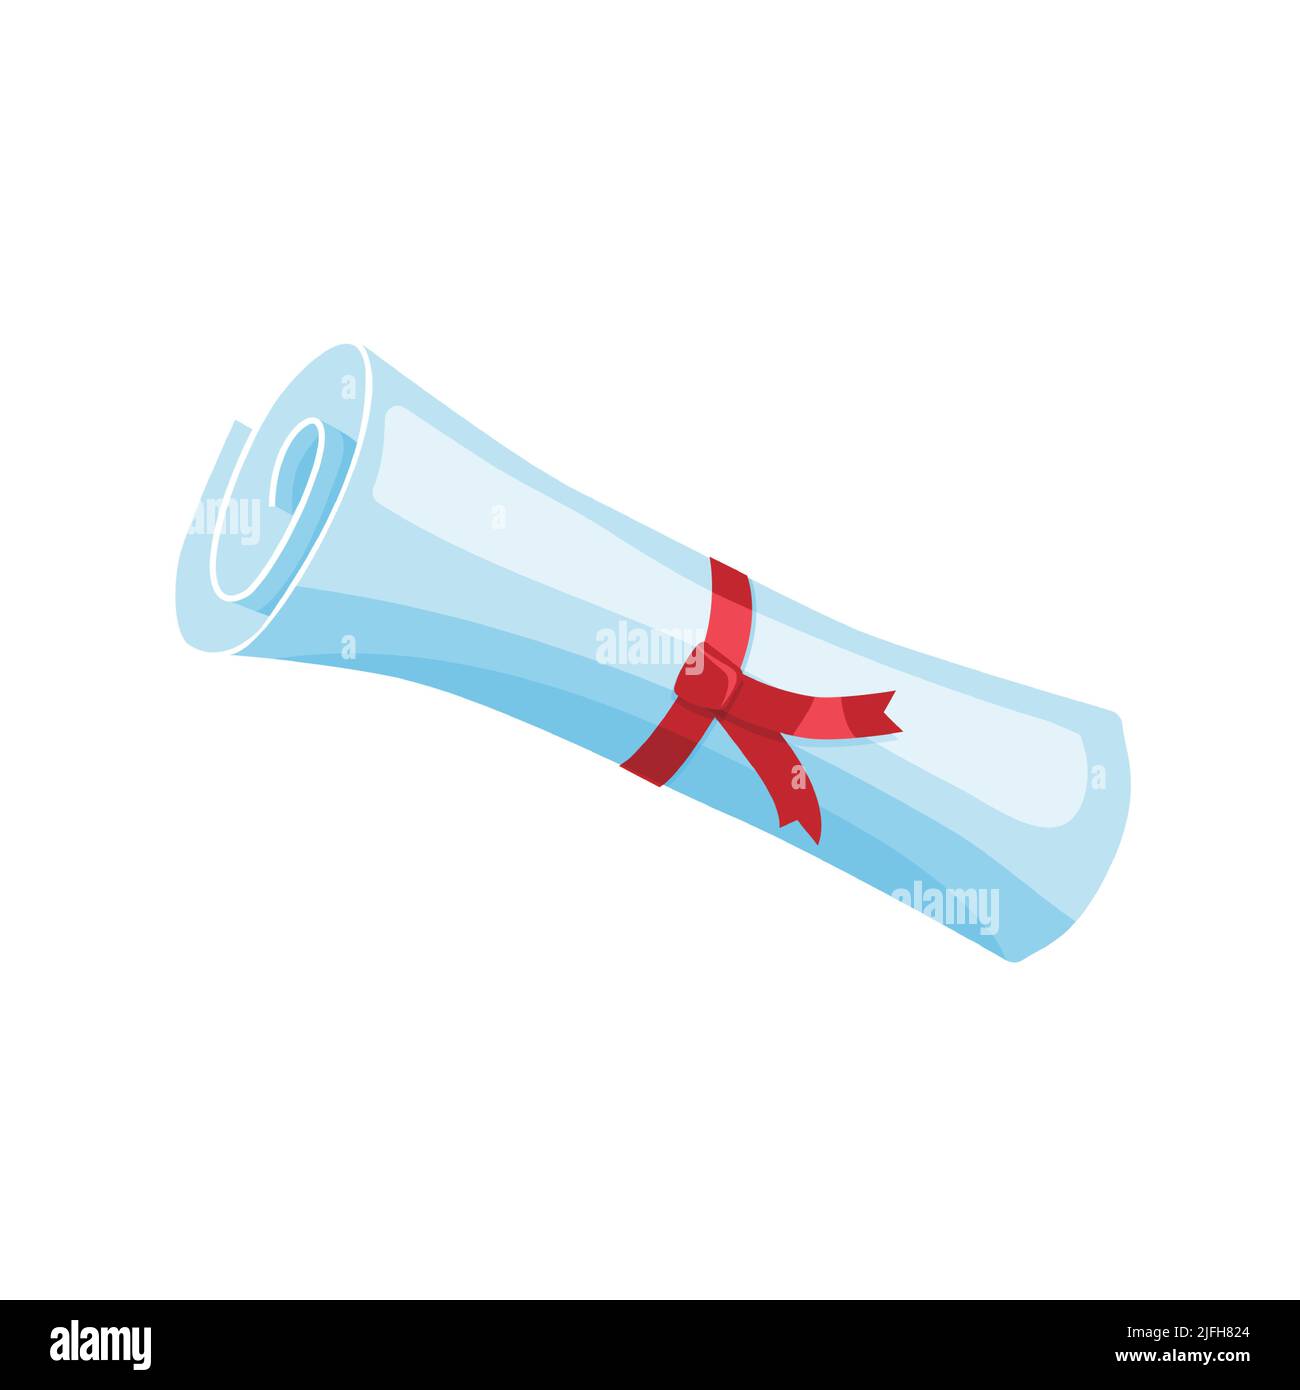 Degree Scroll with Red Ribbon vector illustration Isolated on White Background. University, school, or college degree certificate icon. Stock Vector